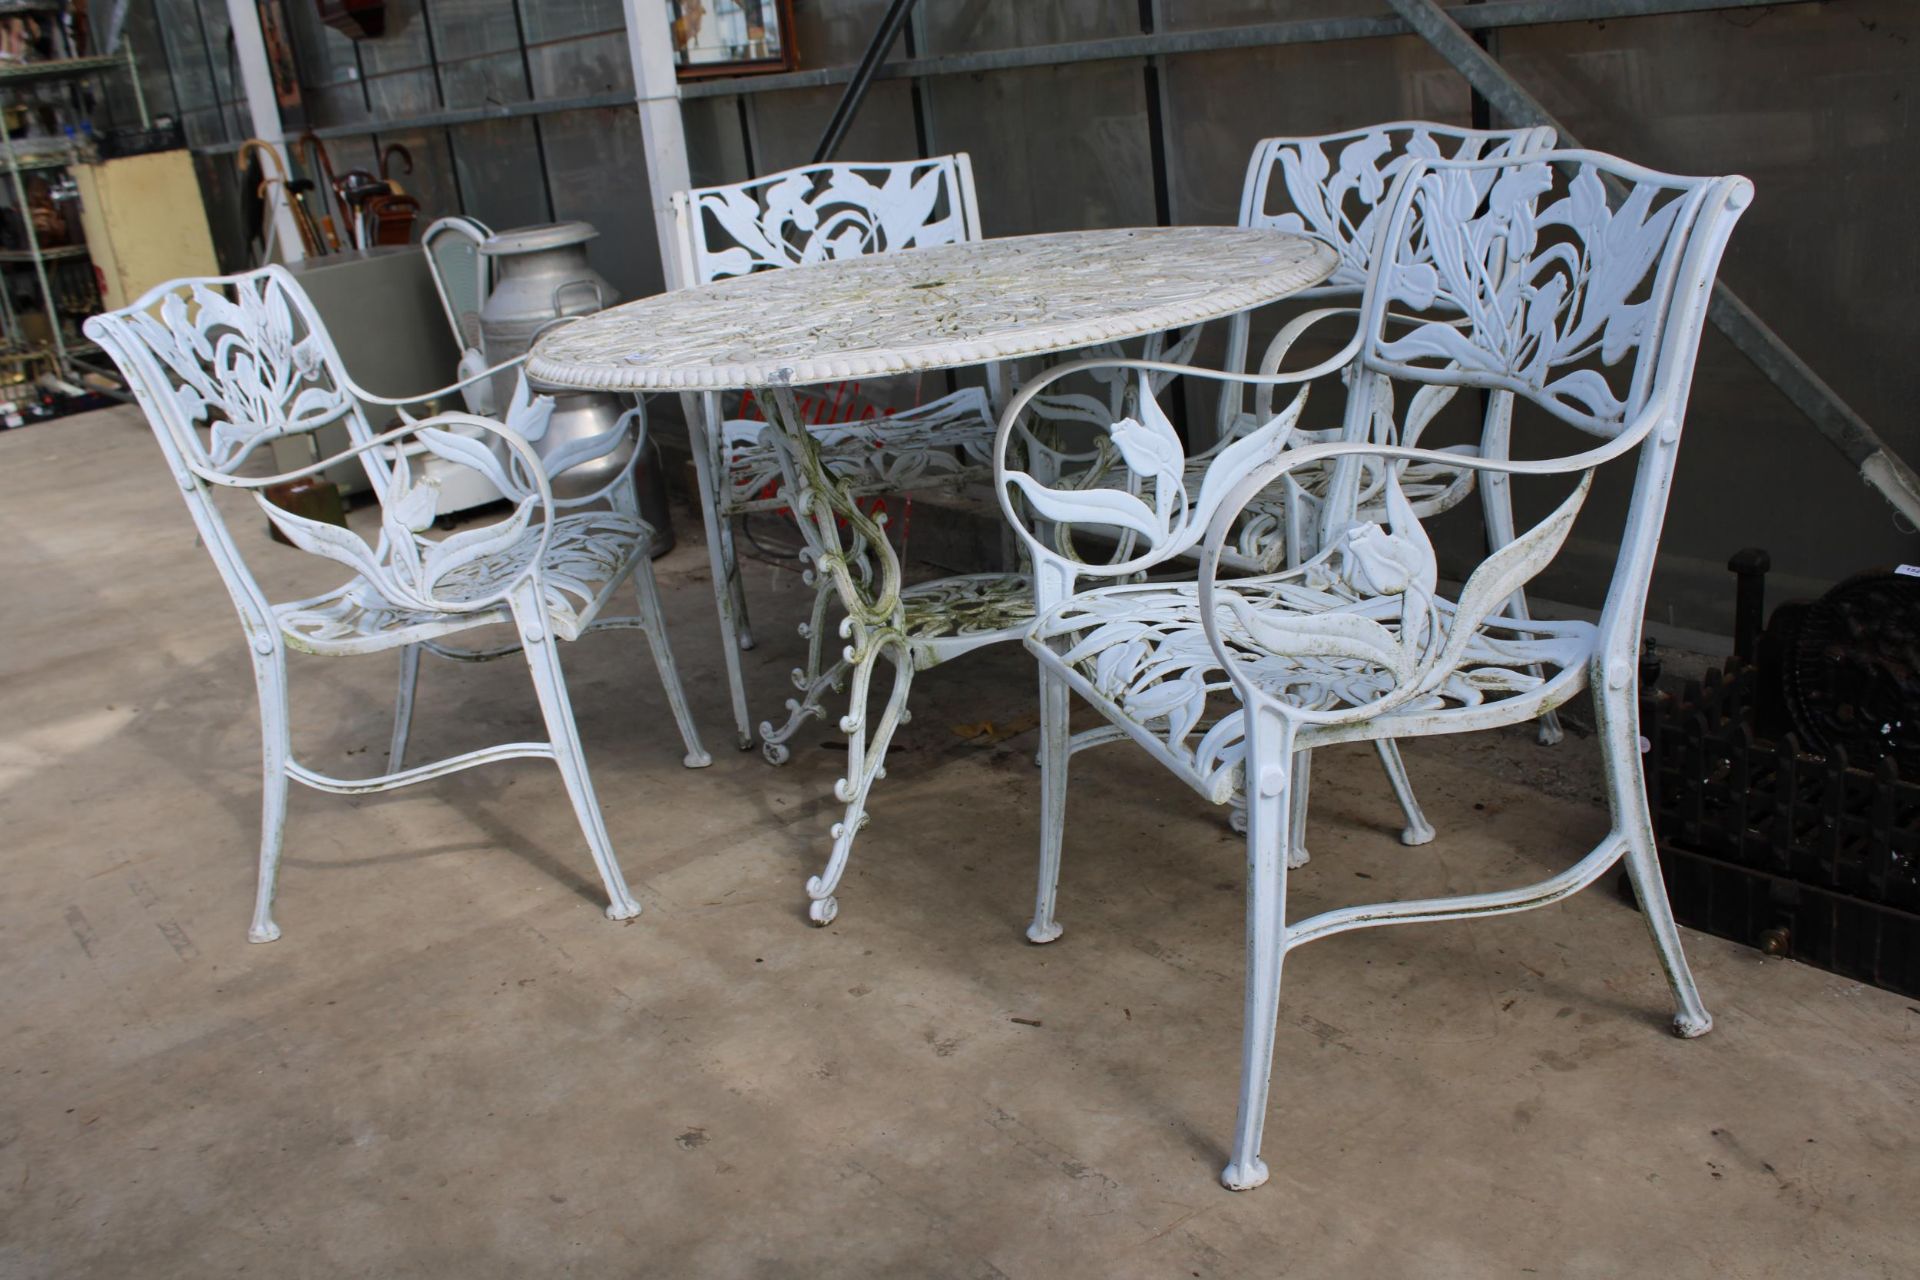 A WHITE CAST ALLOY BISTRO SET COMPRISING OF A LARGE ROUND TABLE AND FOUR CARVER CHAIRS - Image 3 of 3